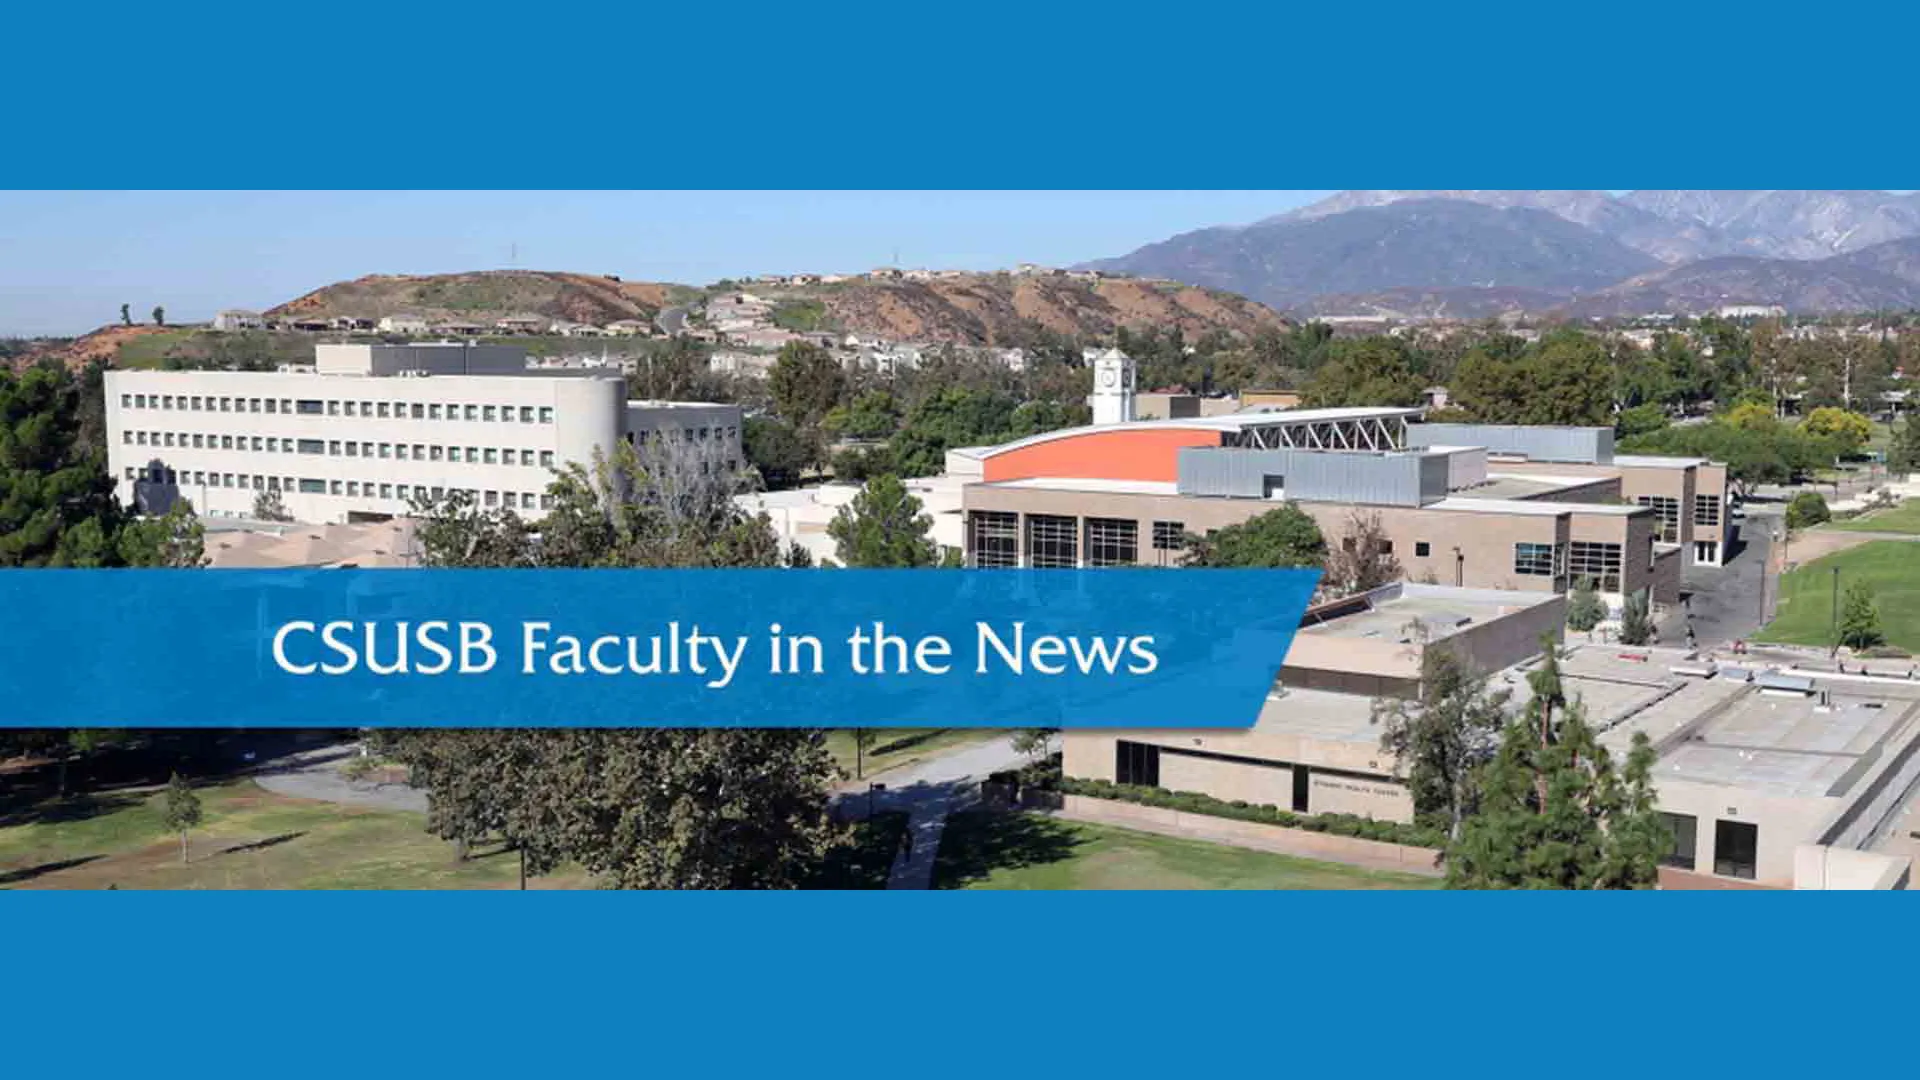 "CSUSB Faculty in the news landing page image"